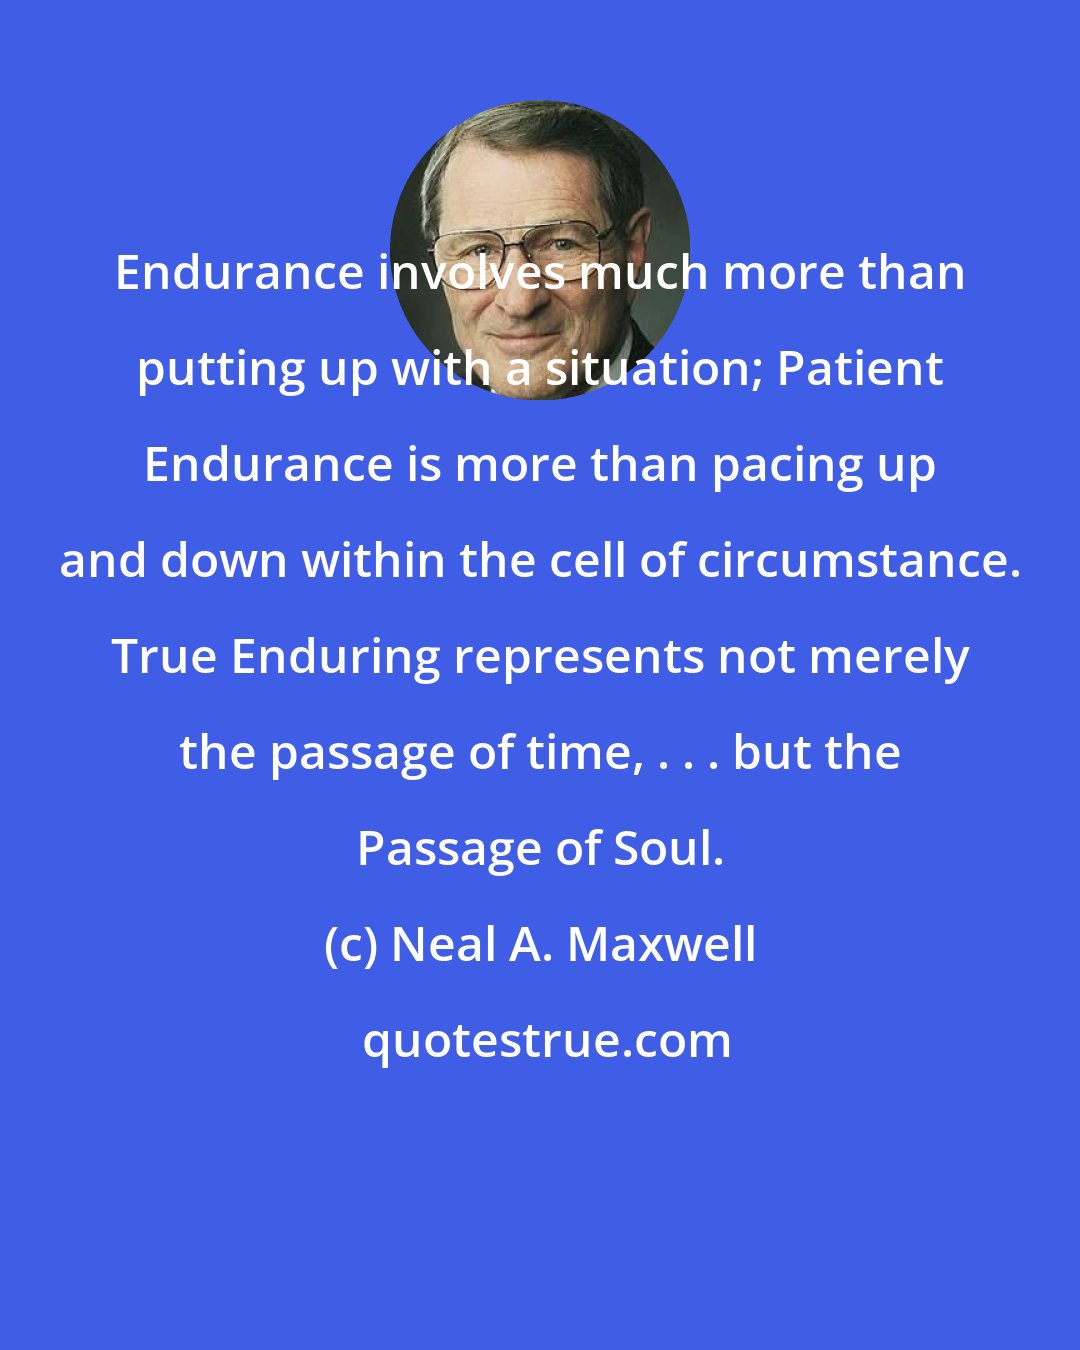 Neal A. Maxwell: Endurance involves much more than putting up with a situation; Patient Endurance is more than pacing up and down within the cell of circumstance. True Enduring represents not merely the passage of time, . . . but the Passage of Soul.